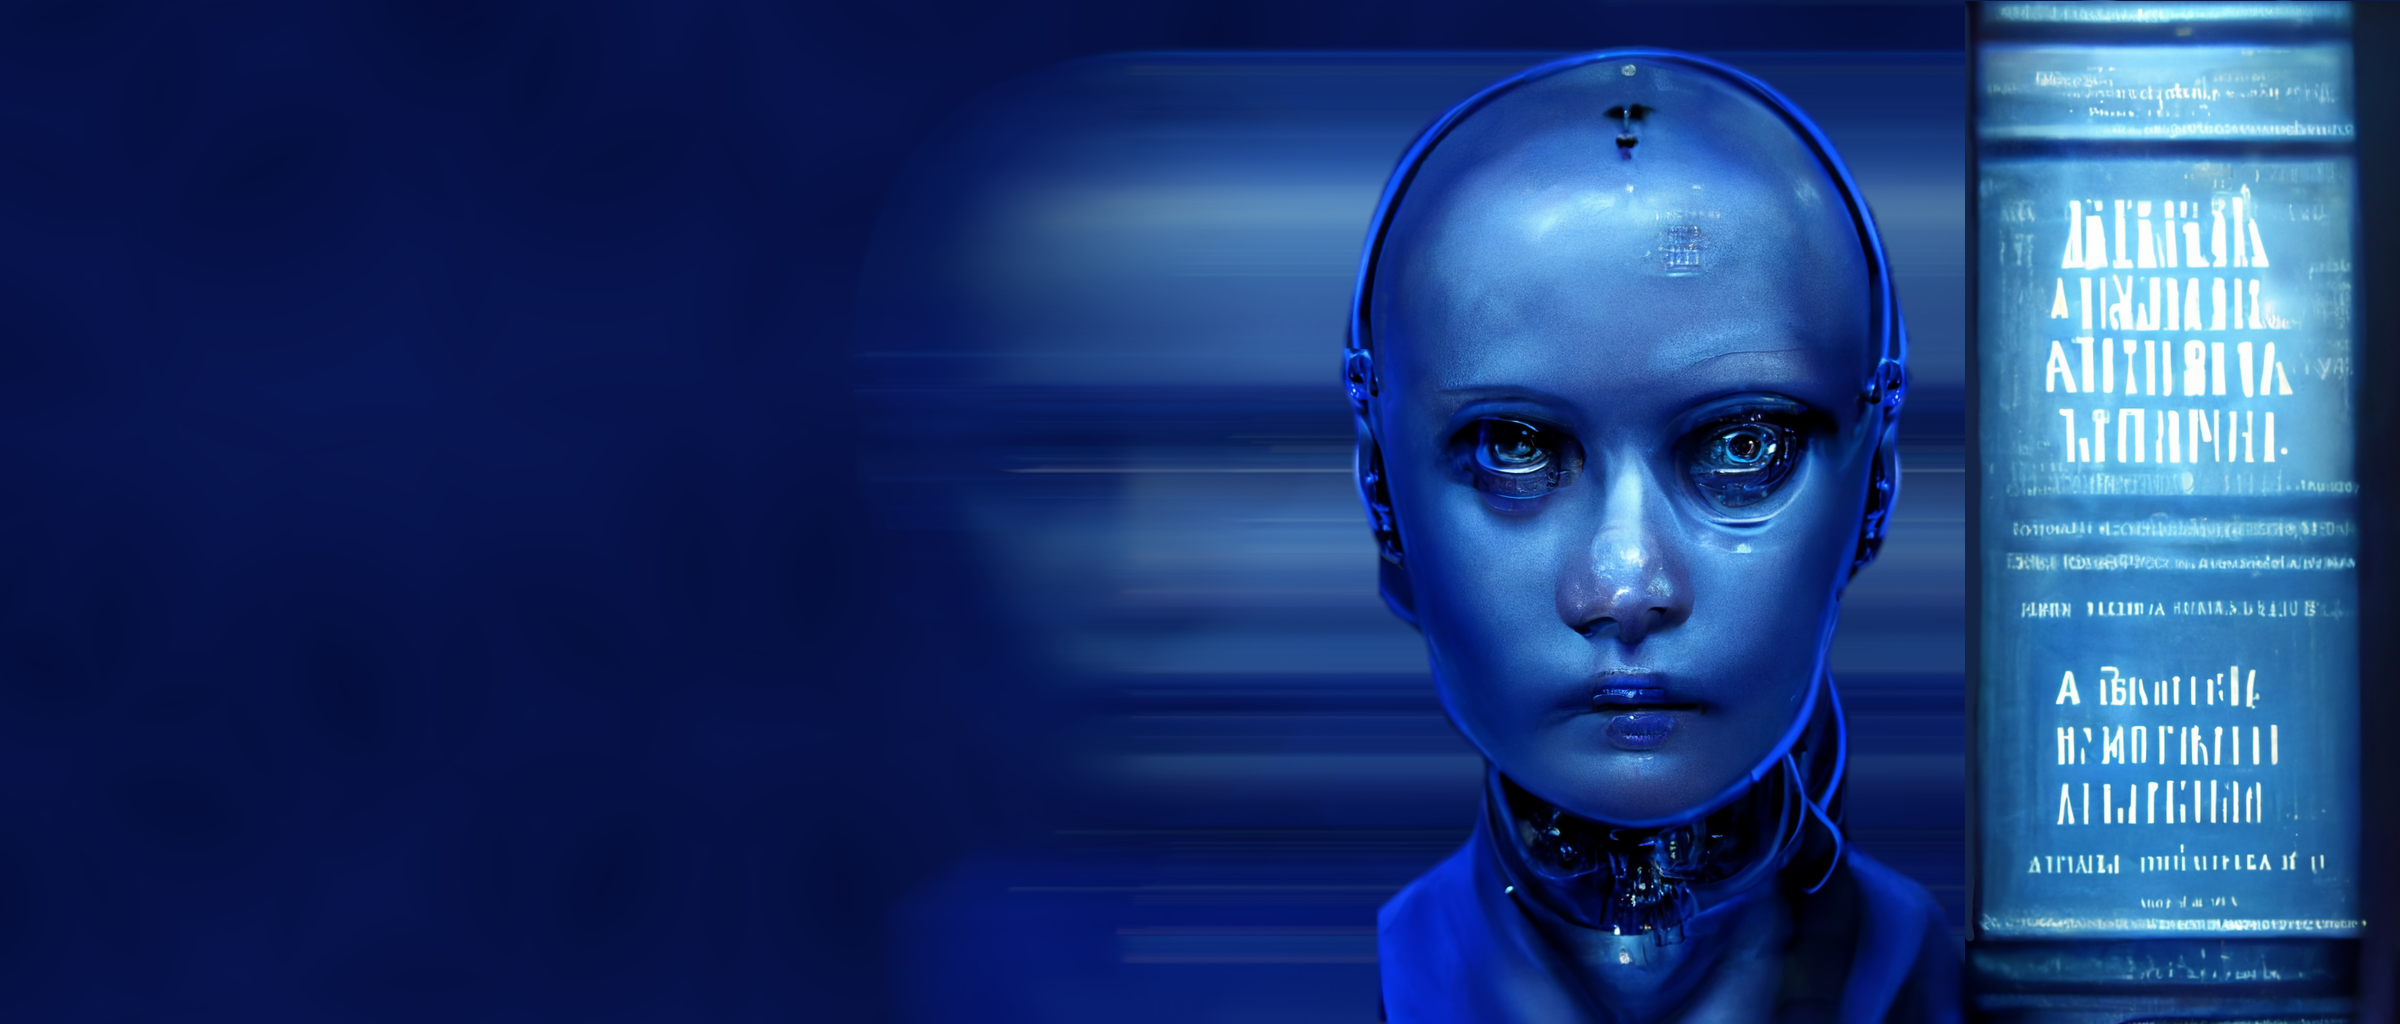 Morality of Artificial Intelligence